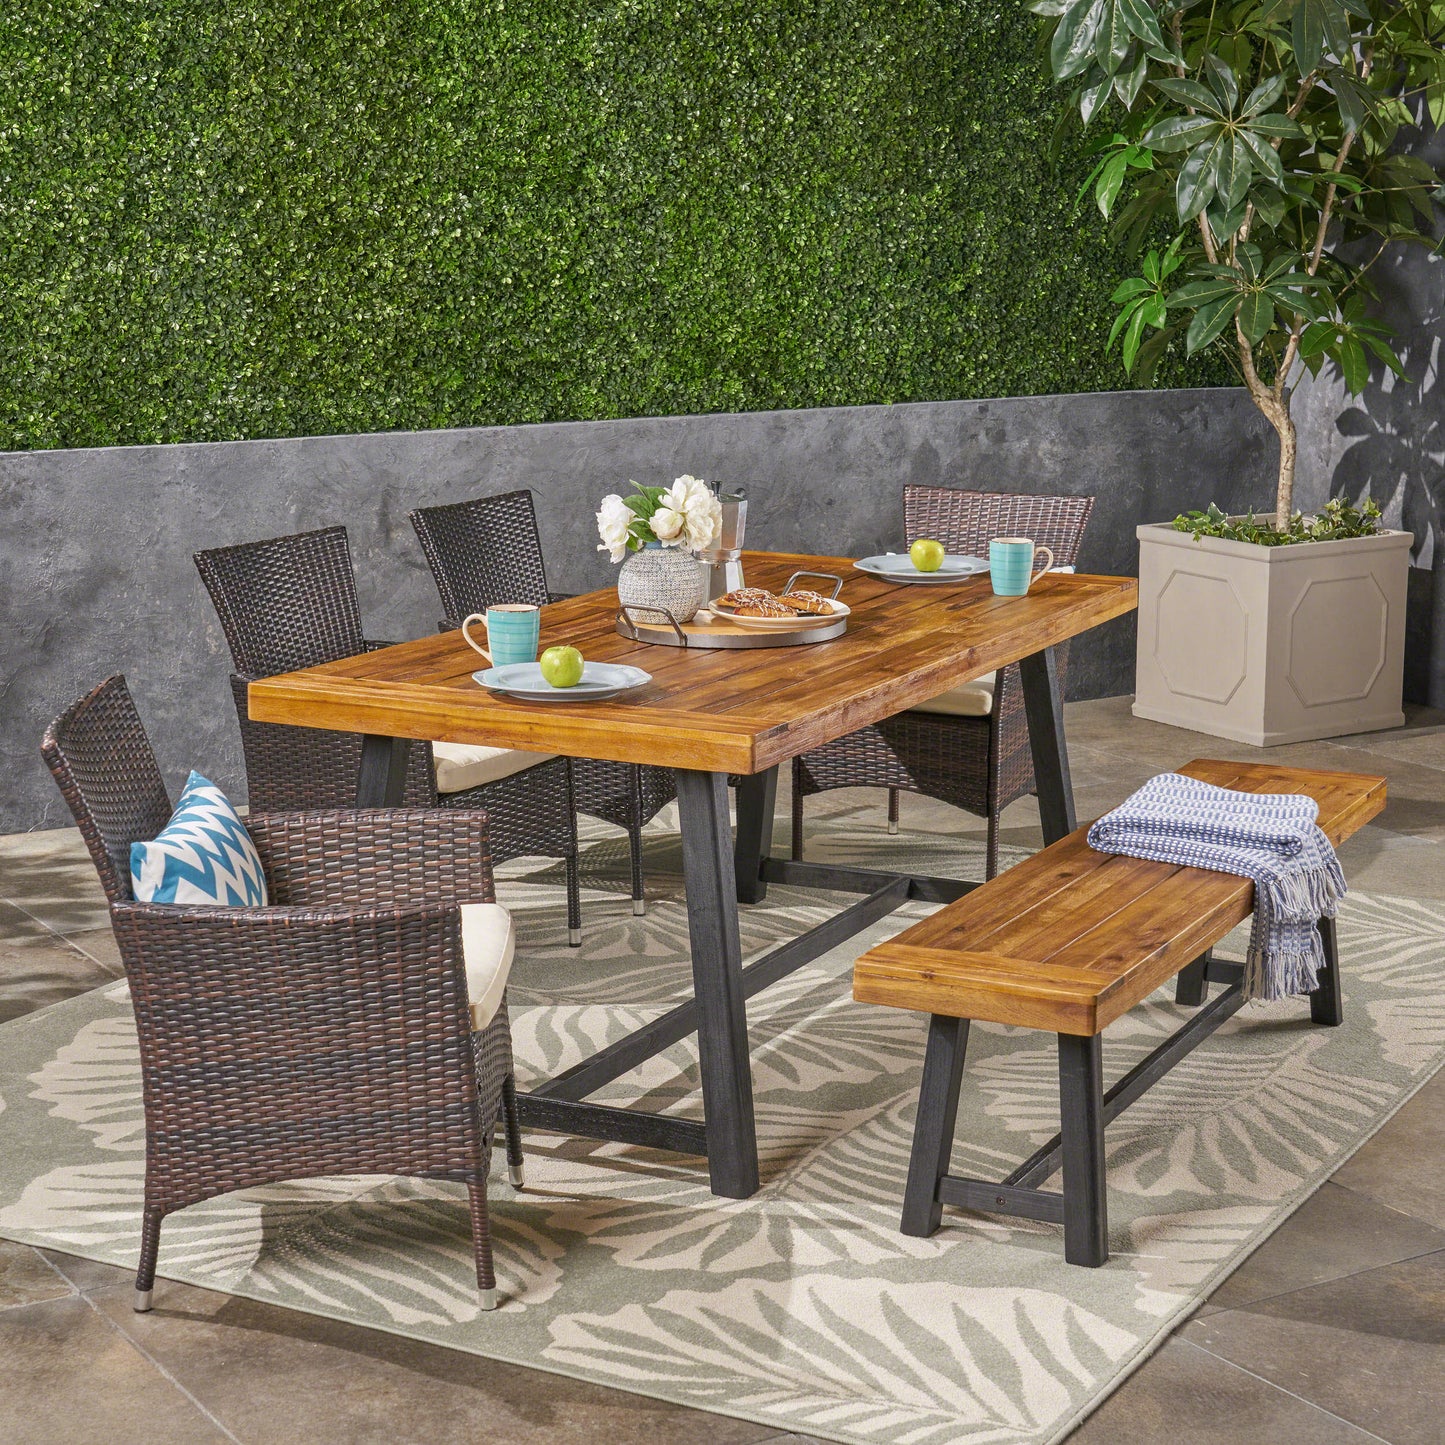 Jack Outdoor 6 Piece Dining Set with Stacking Wicker Chairs and Bench, Sandblast Teak and Black and Multi Brown